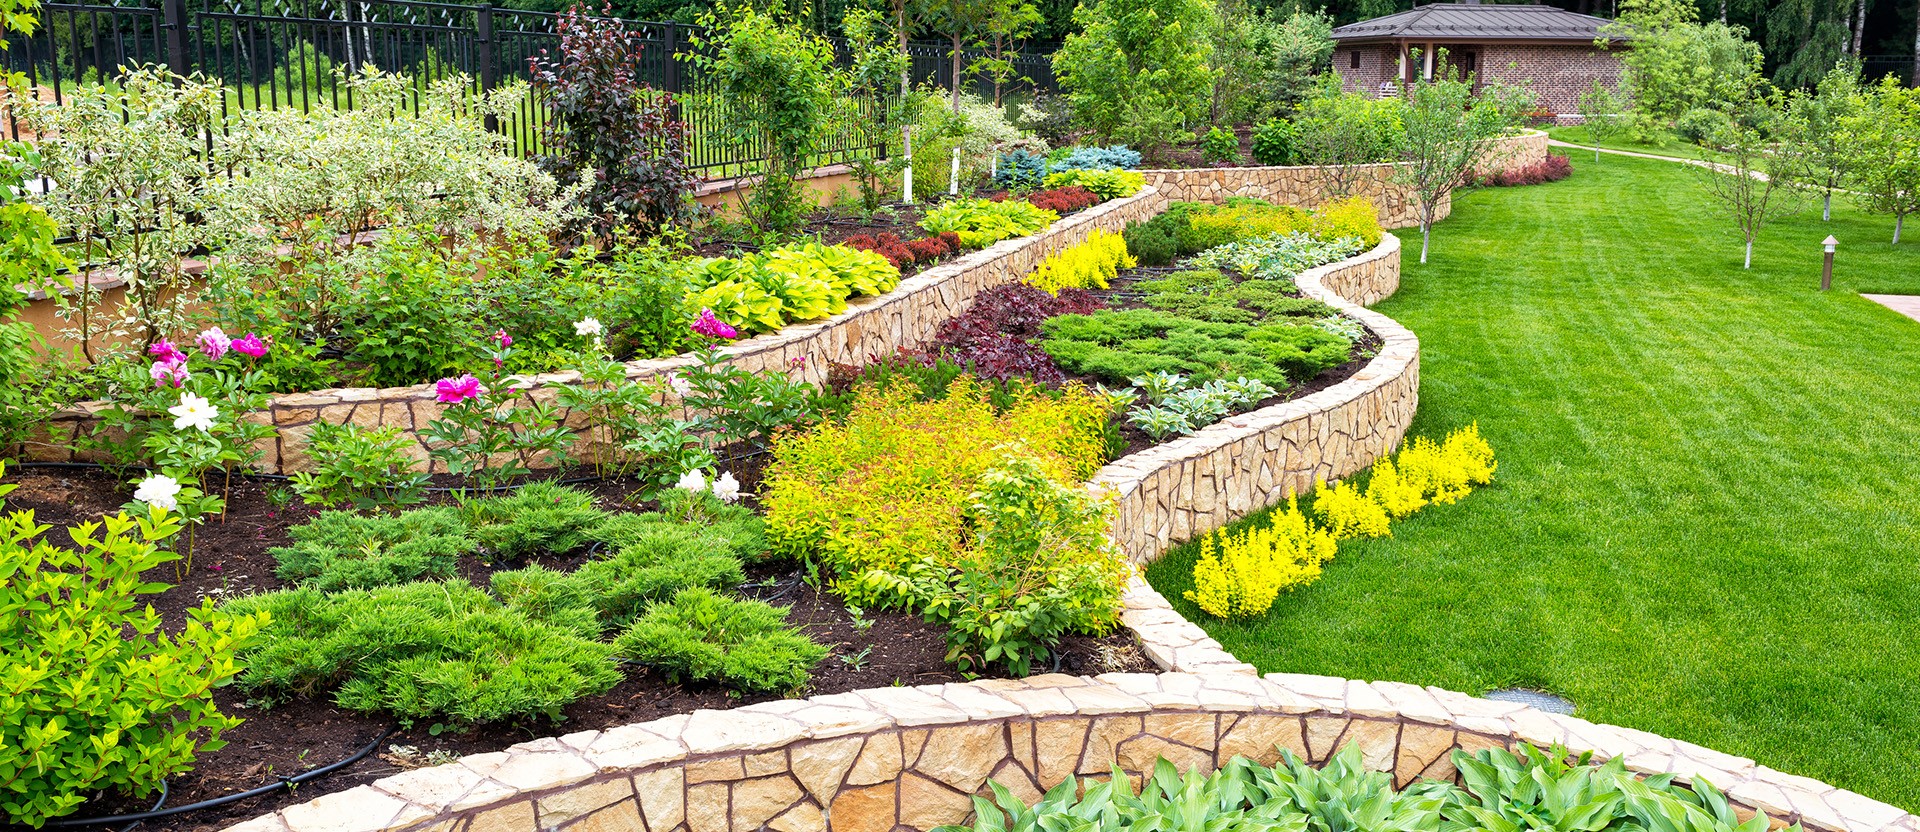 Landscape Contractors Manchester Ct Carone And Sons Landscaping